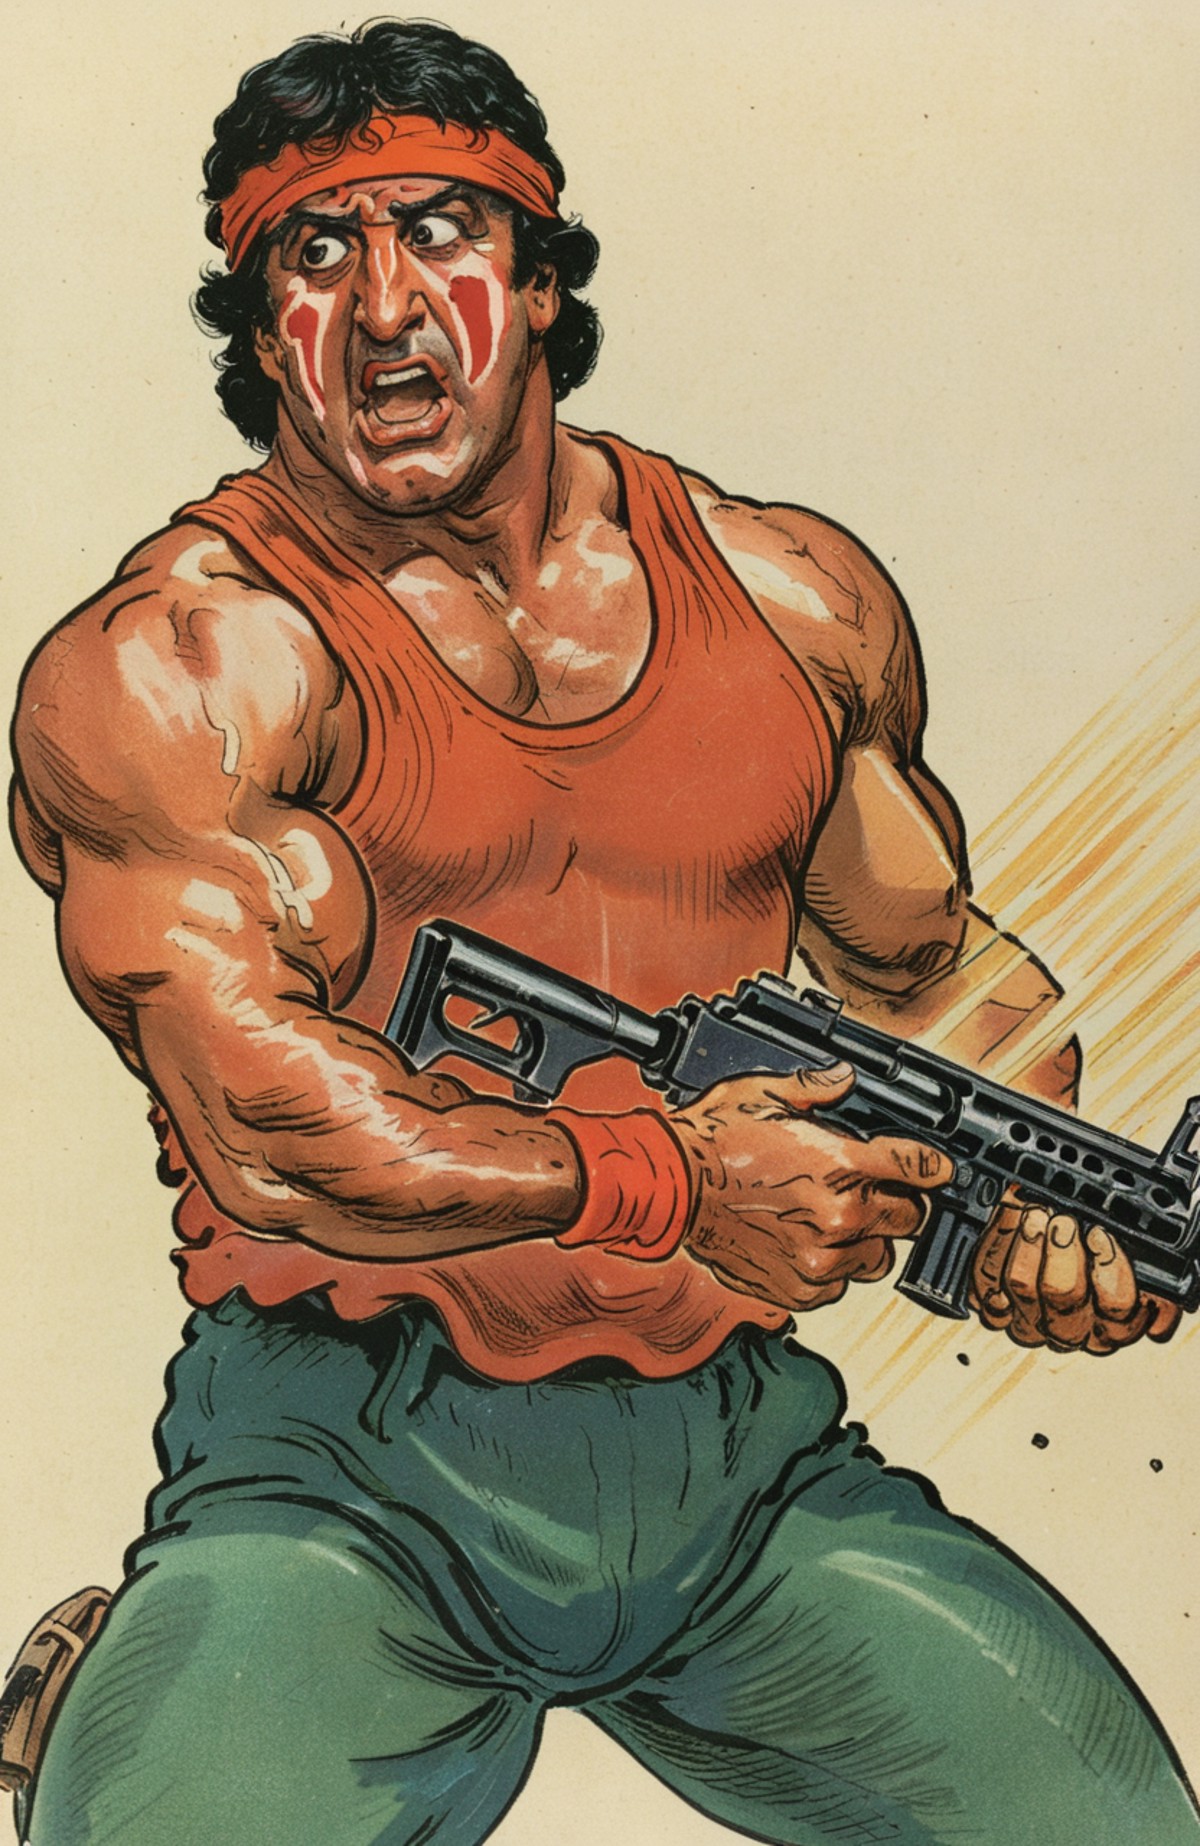 vintage illustration, sylvester stallone wearing a red headband is shooting with a machine gun, angry, open mouth, action ...